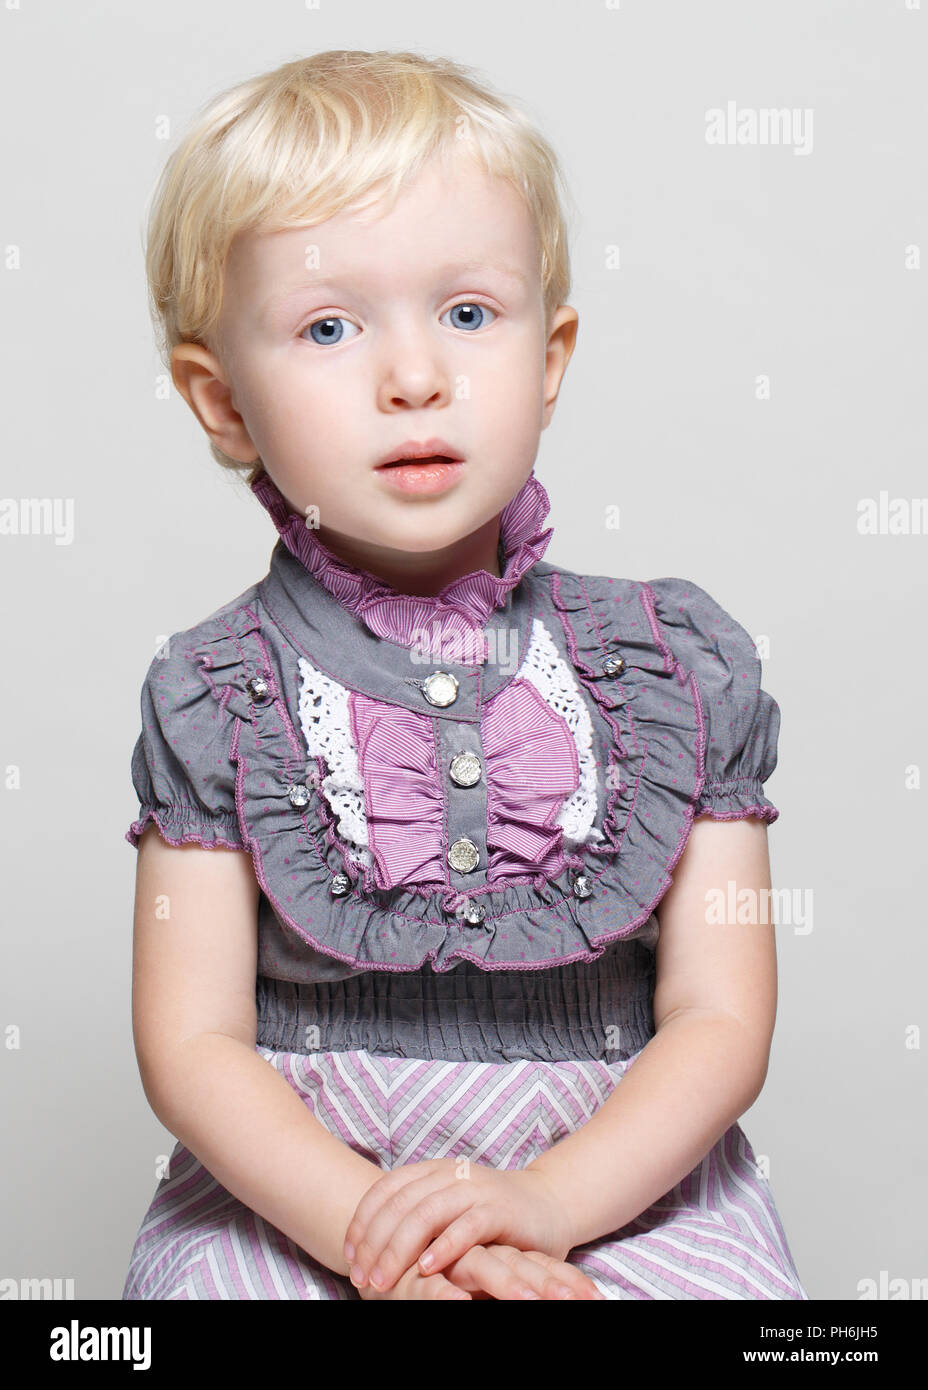 Closeup Portrait Of Cute Child Toddler Girl With Blonde Hair And